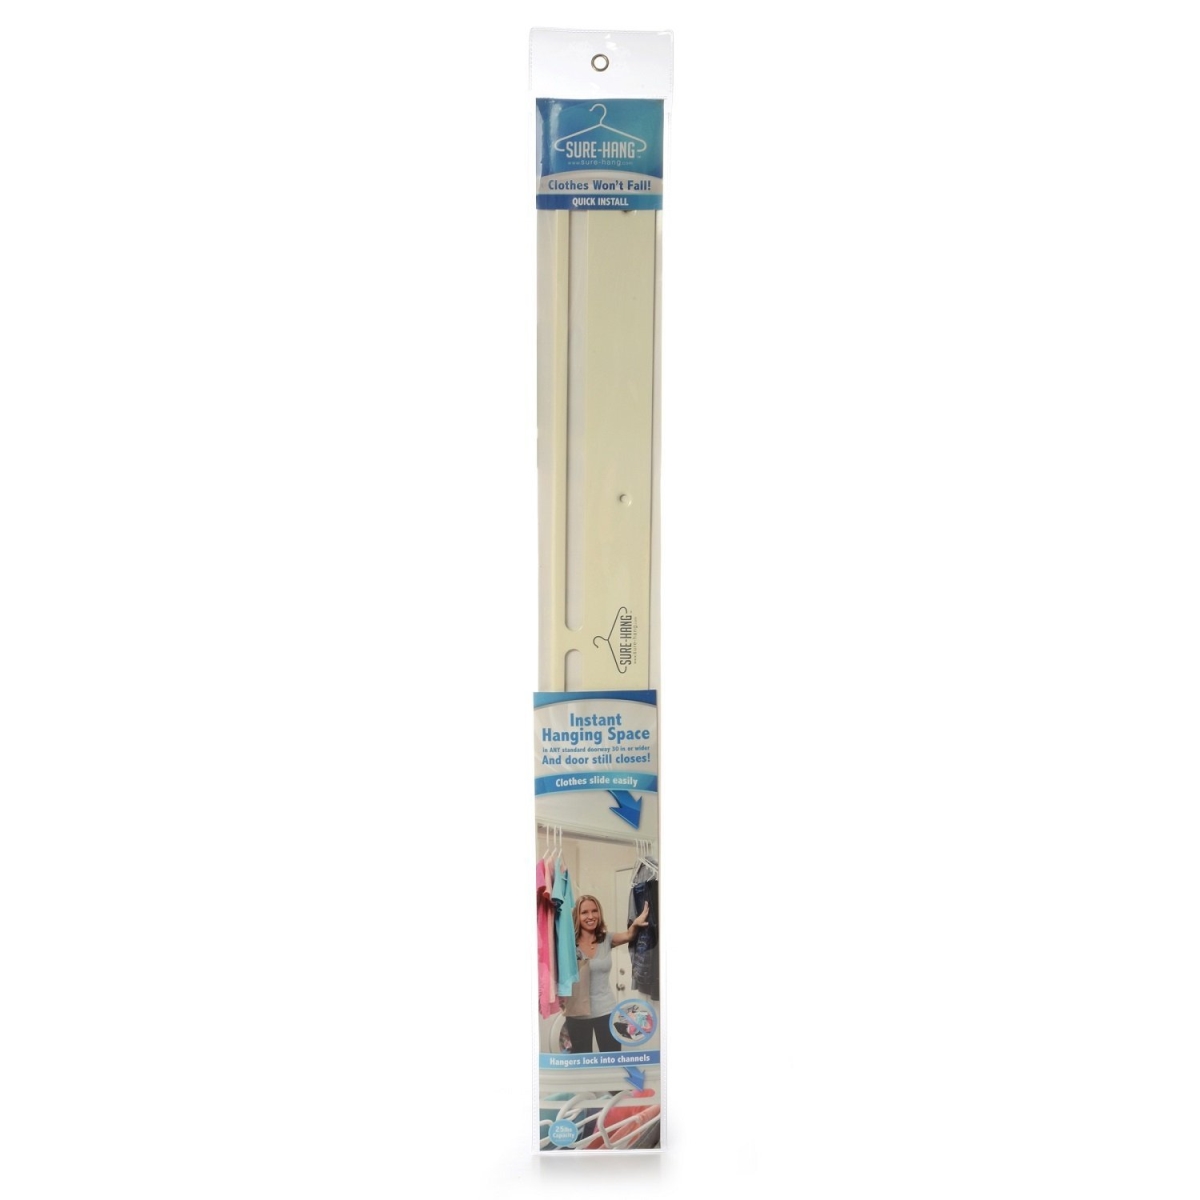 Sh30-100wh-12 32 X 3.75 In. Instant Hanging Space & Hanging Rod, White